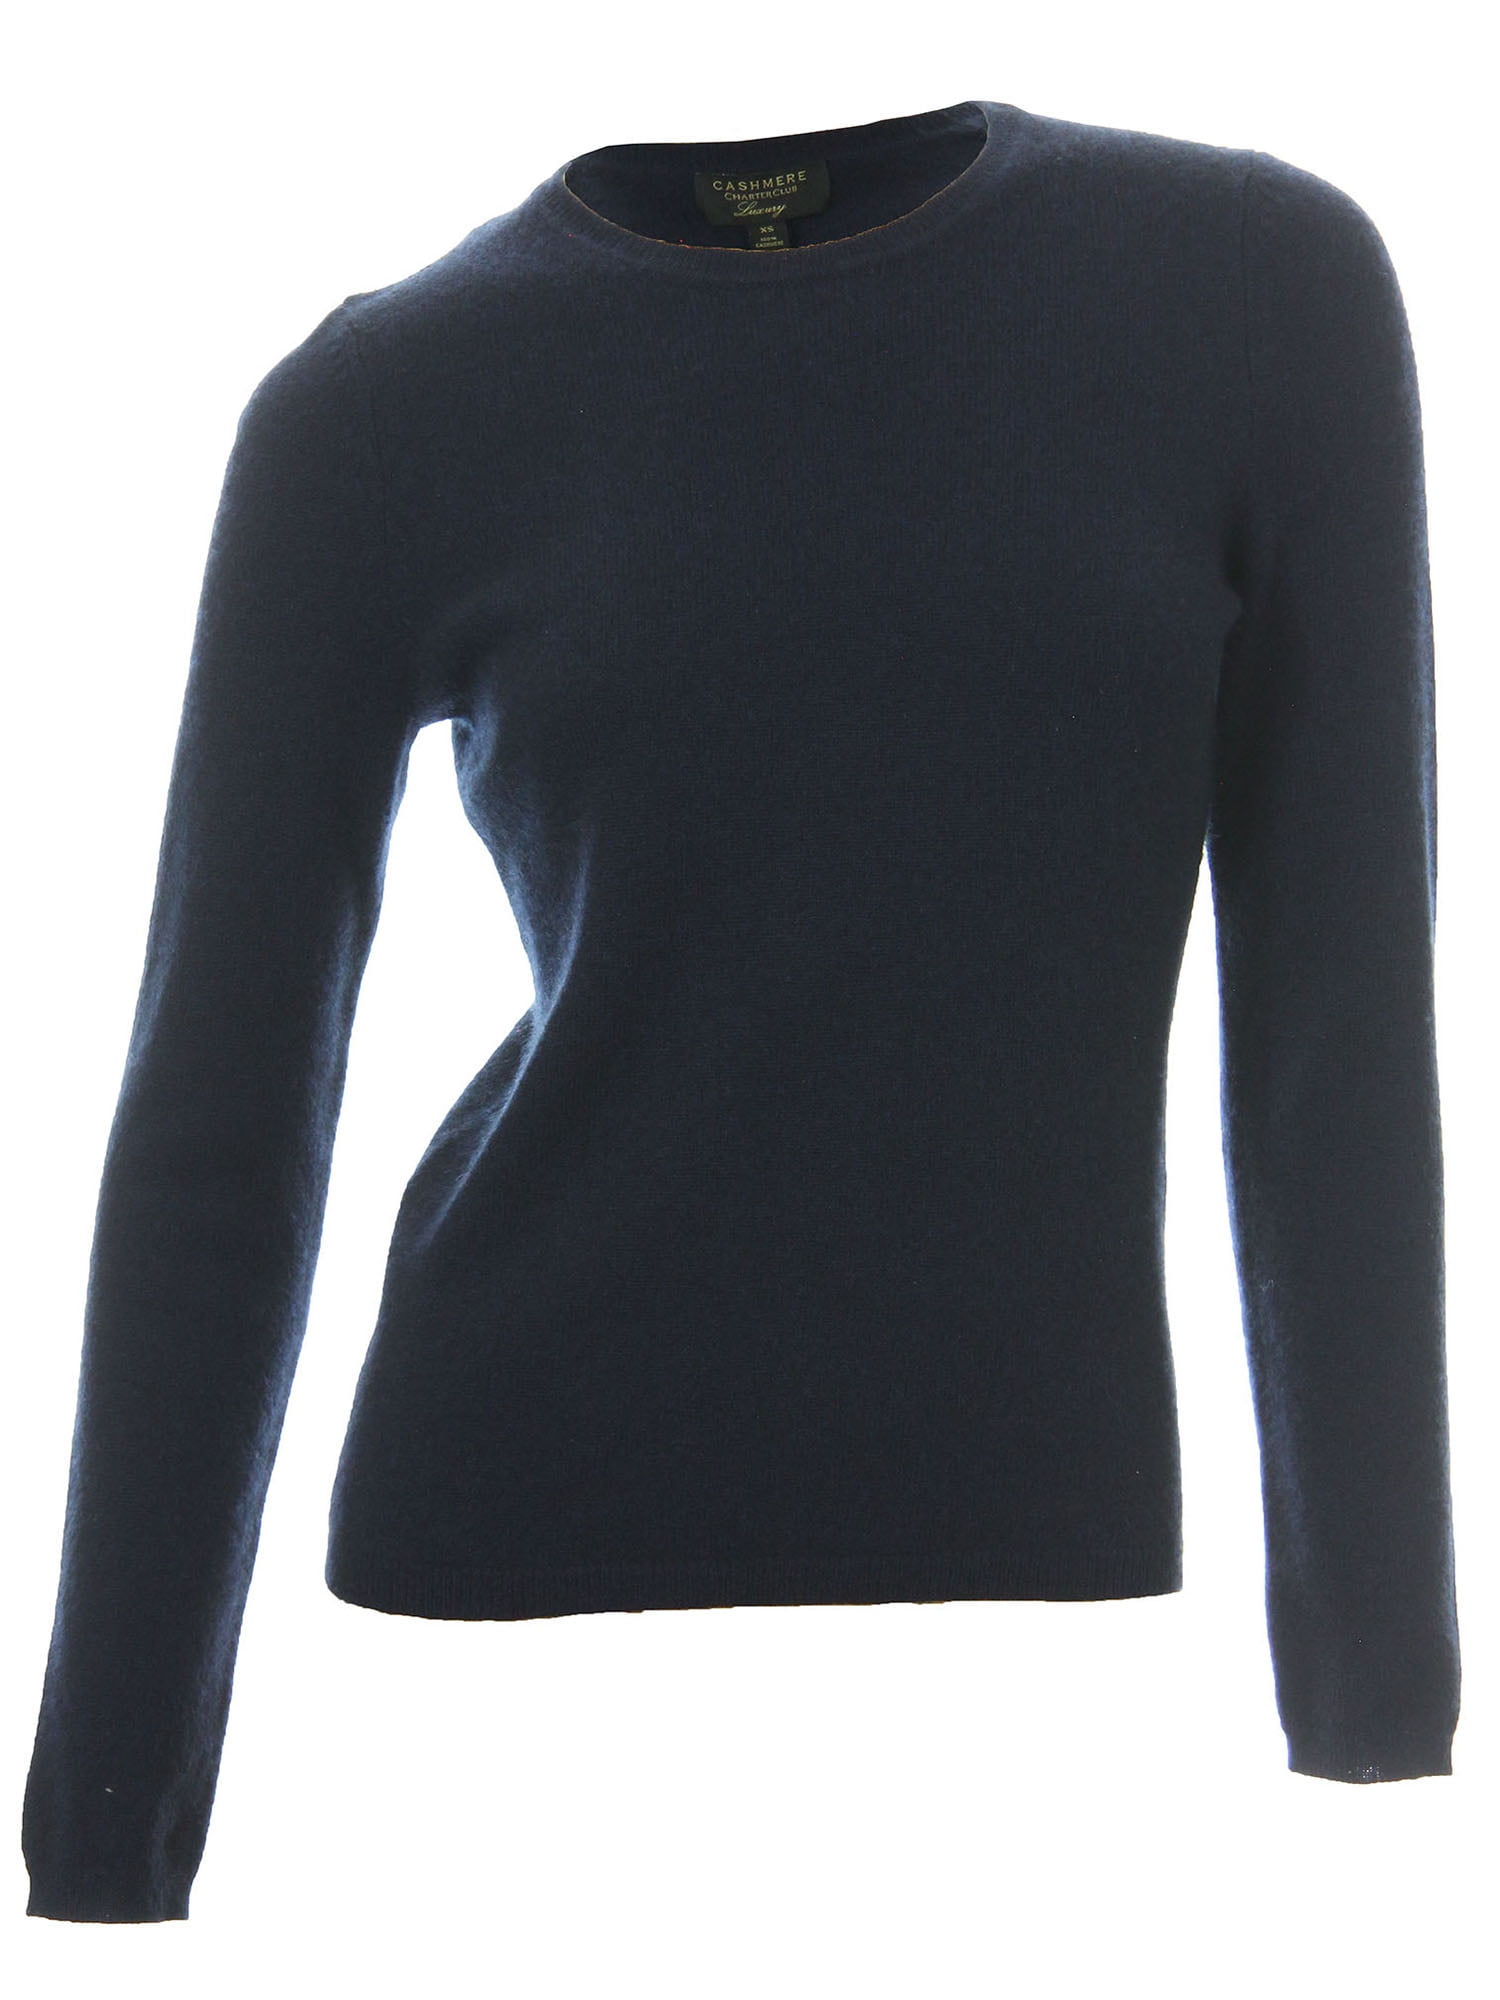 Charter Club Women's Long Sleeve Crew Neck Cashmere Sweater X-Small ...